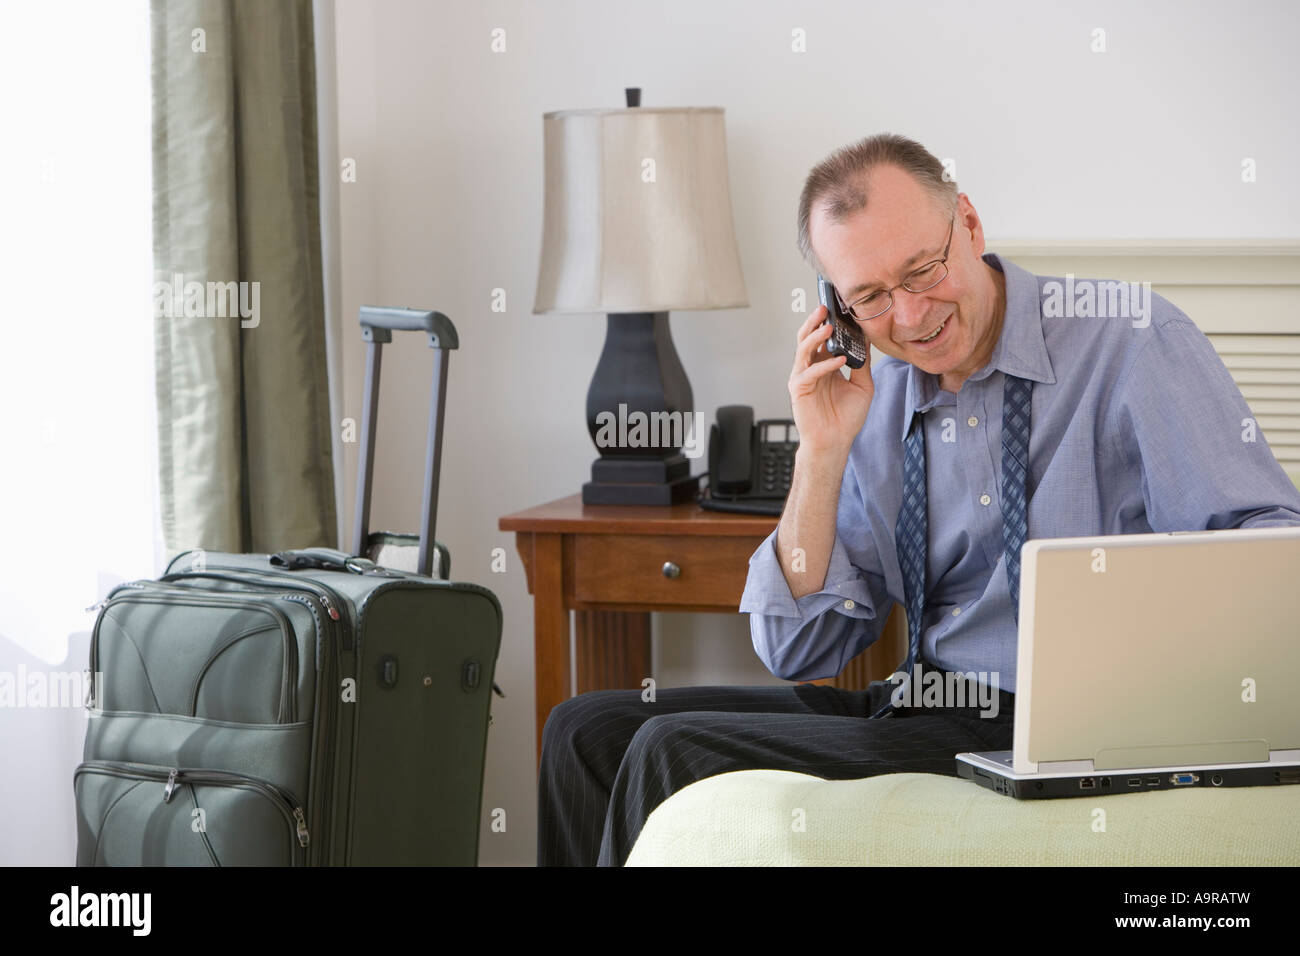 Businessman with suitcase in hotel room Stock Photo